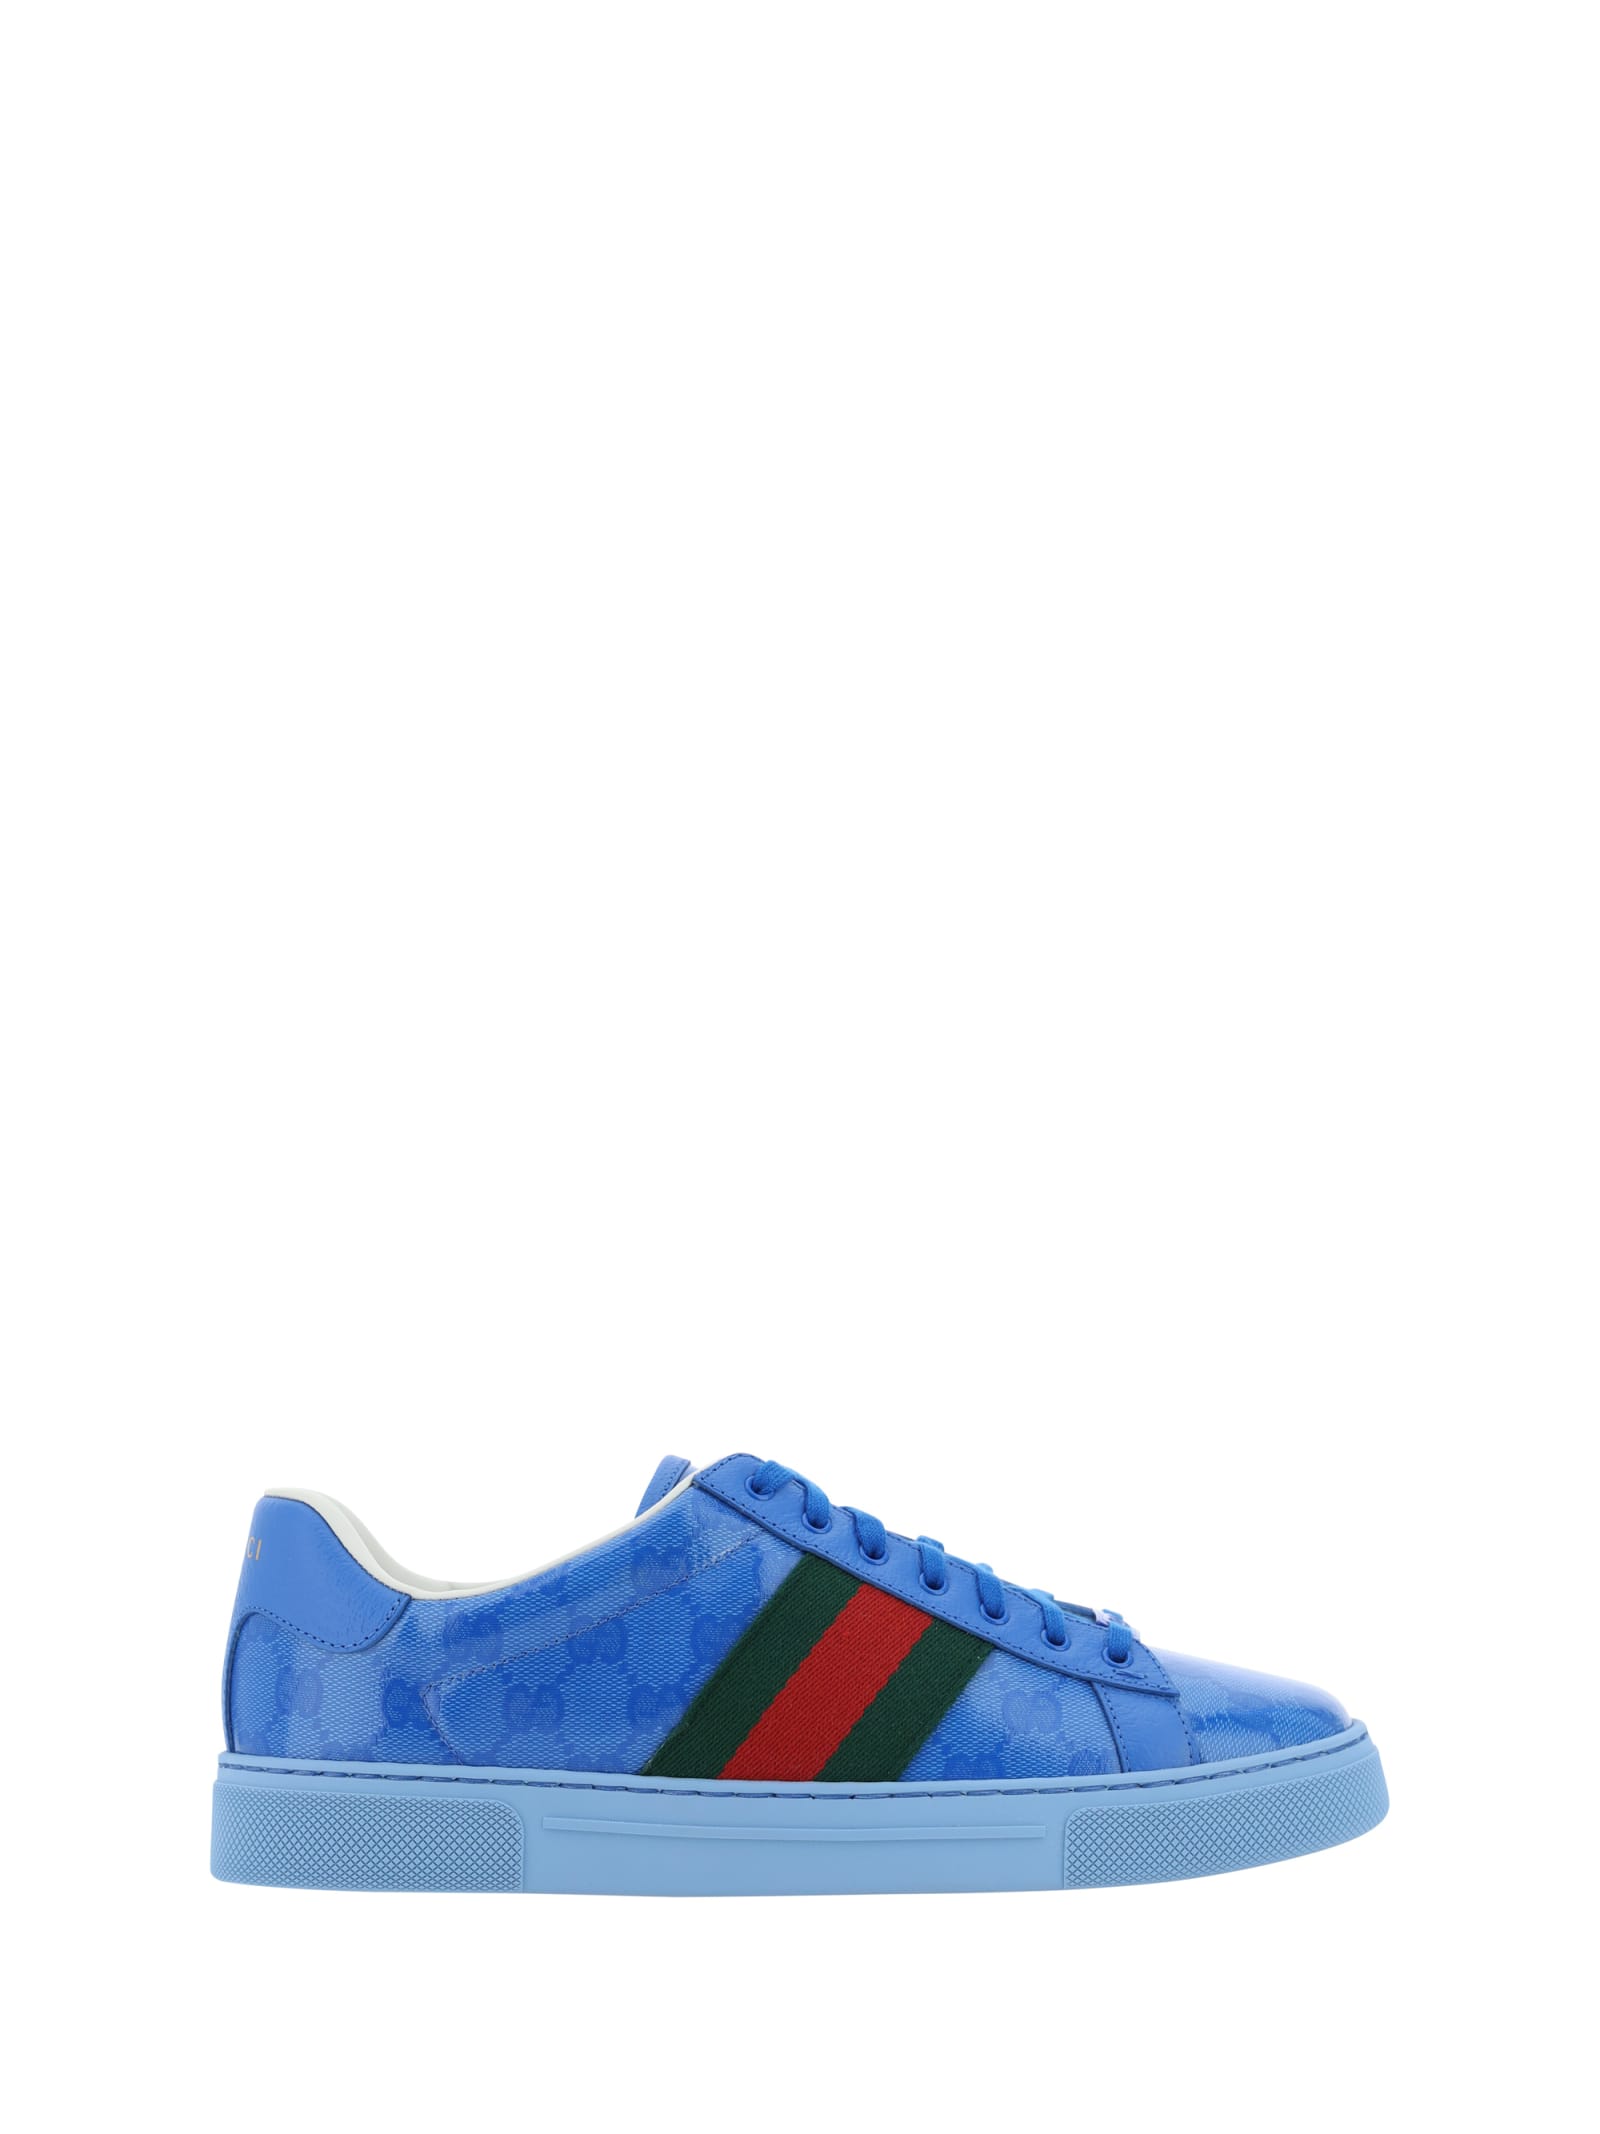 GUCCI ACE SNEAKERS